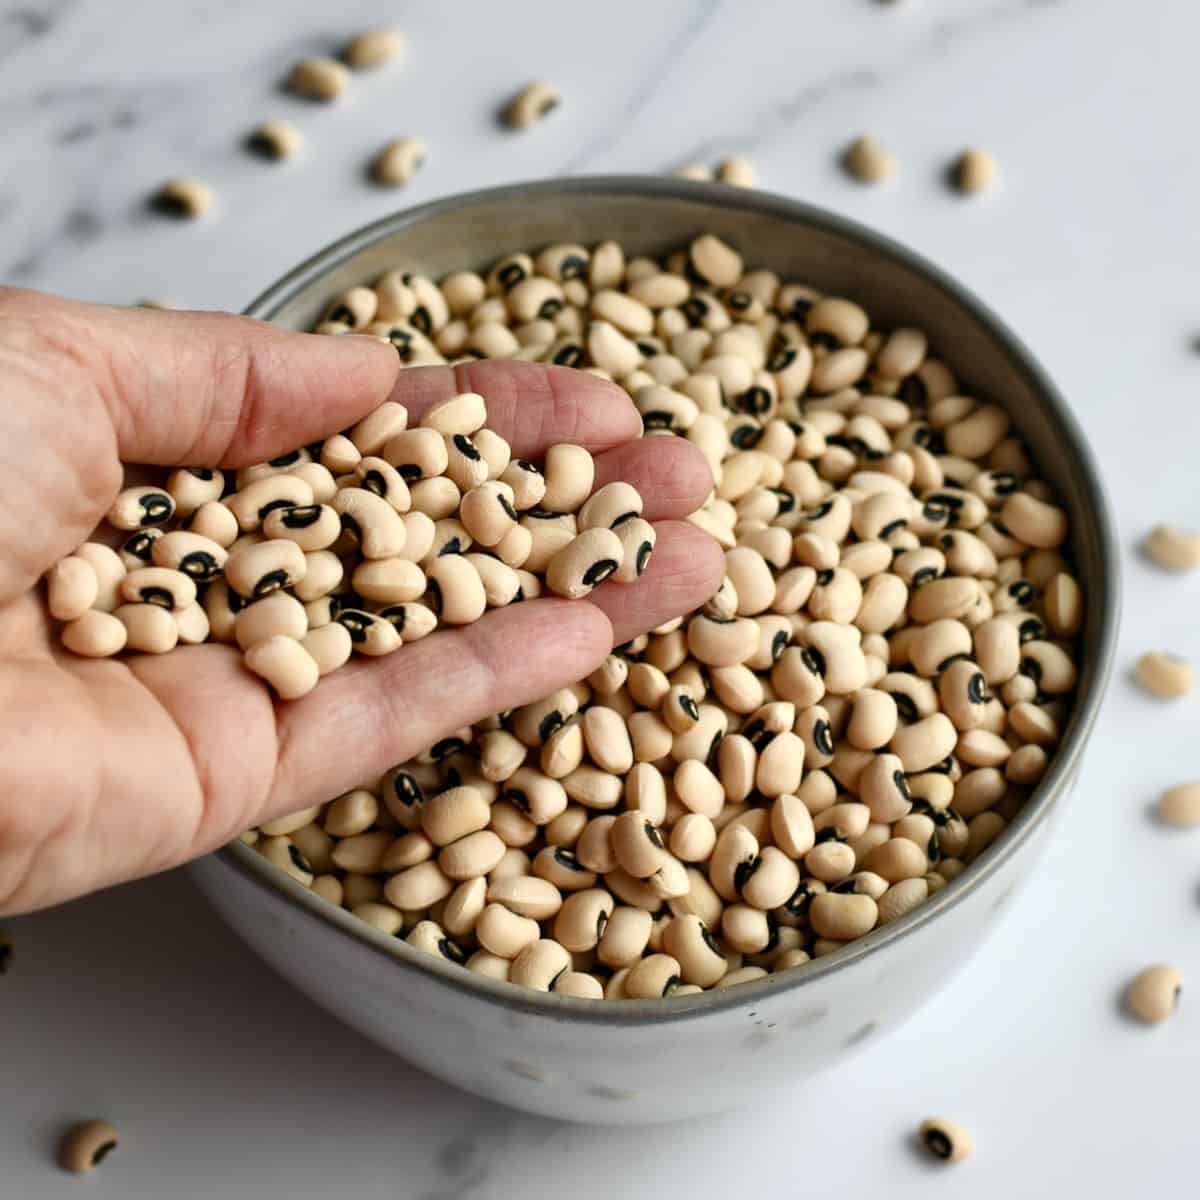 Hand pouring dried black eyed peas in bowl of peas.